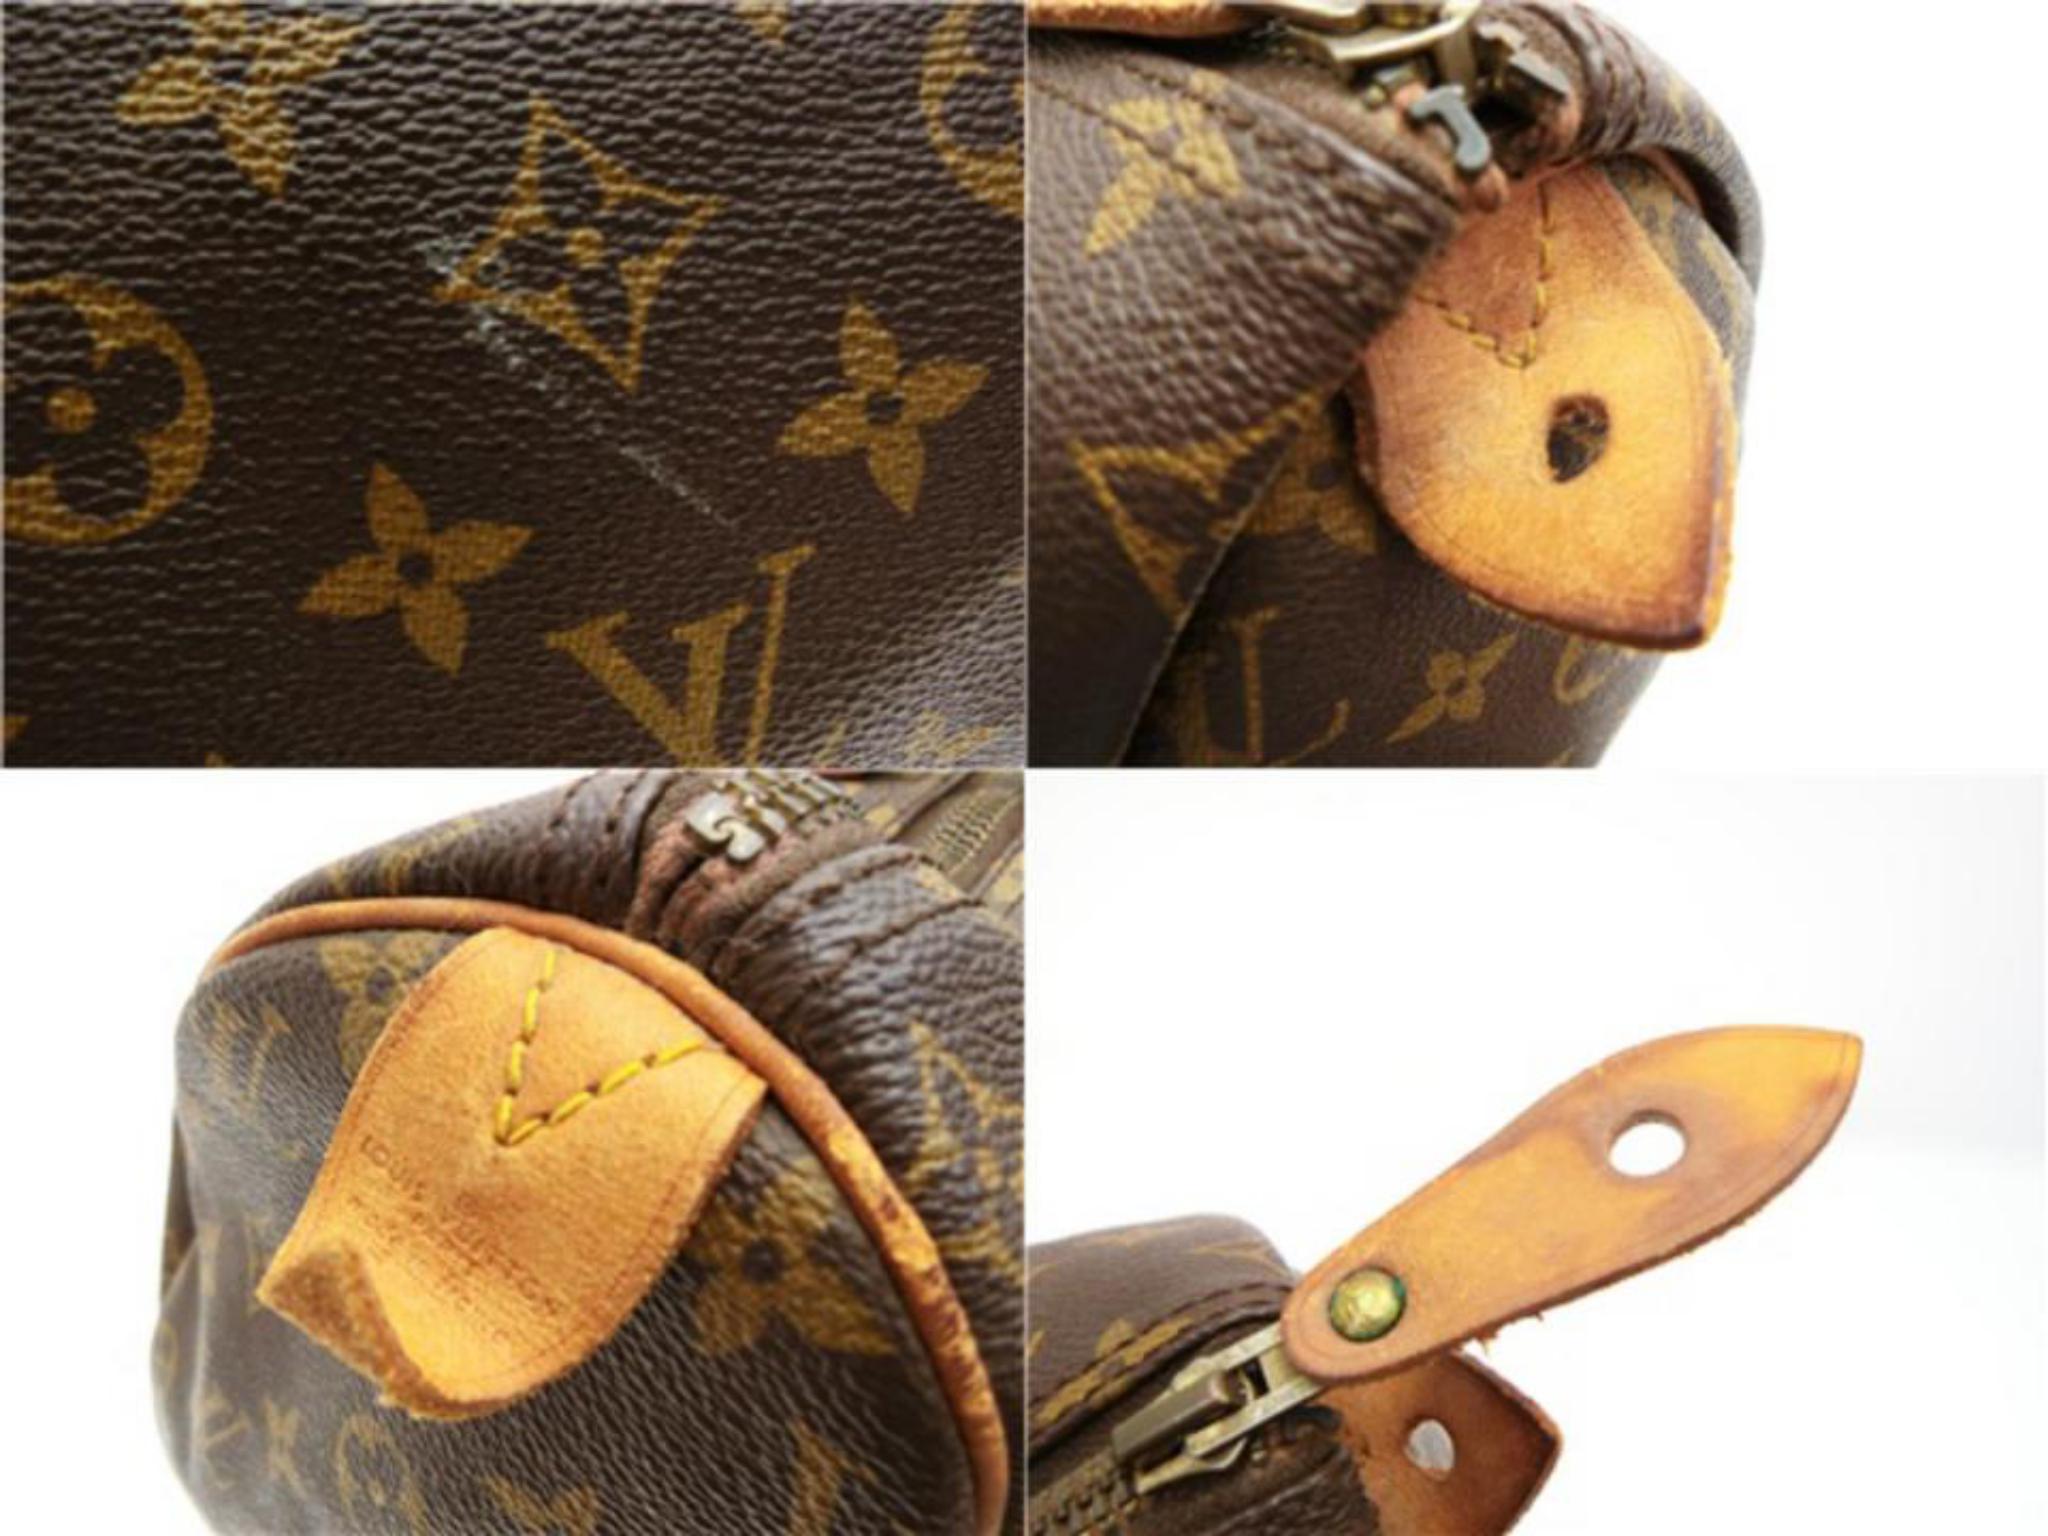 Louis Vuitton Speedy Monogram 40 227741 Brown Coated Canvas Satchel In Good Condition For Sale In Forest Hills, NY